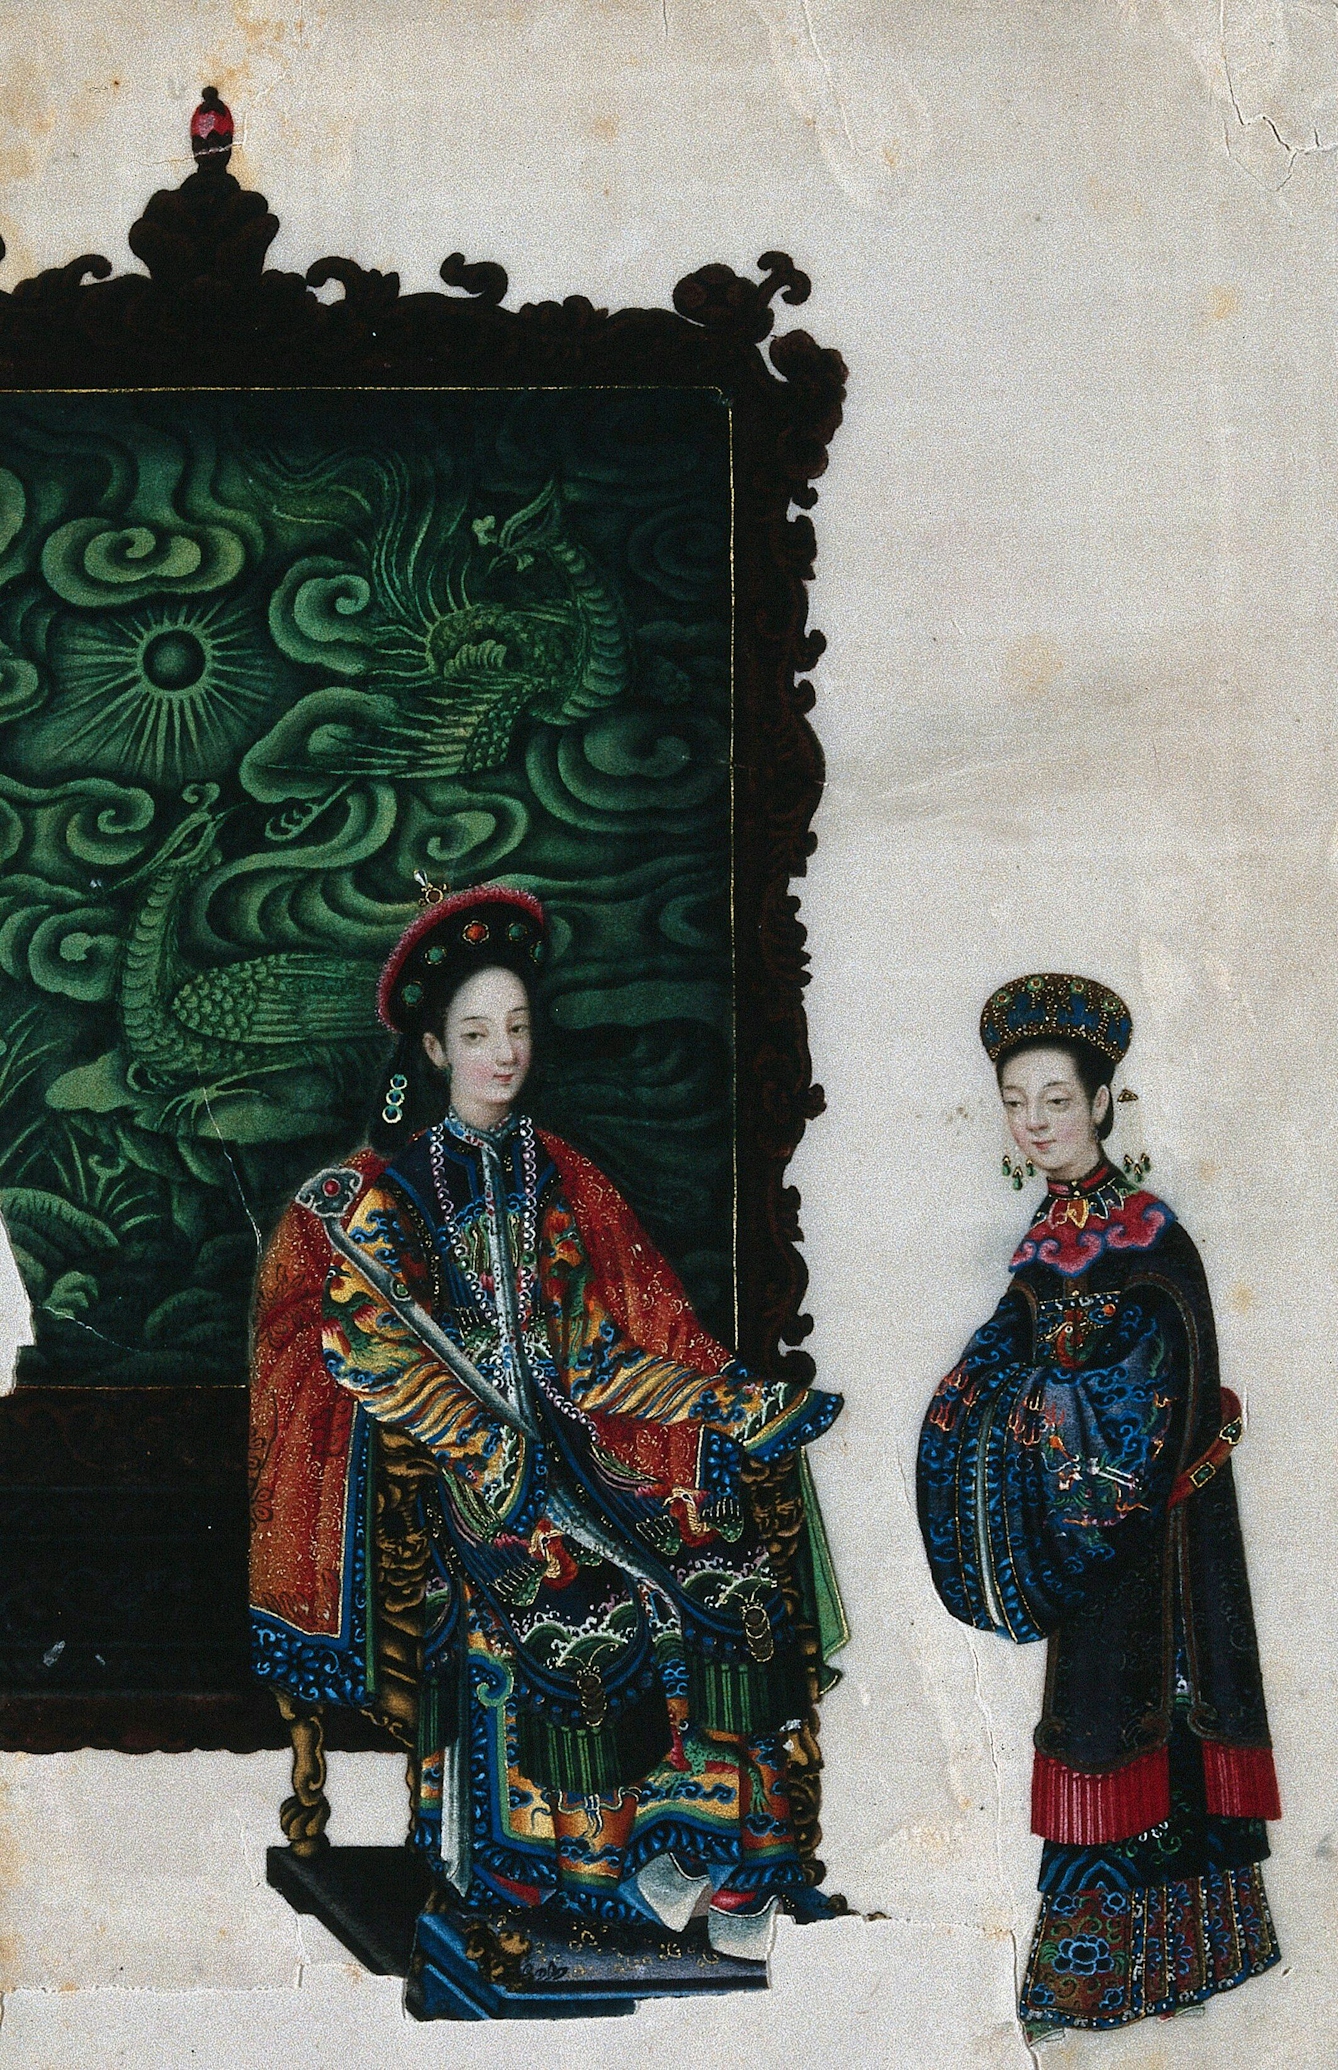 19th century painting of a Chinese lady sat on a chair with her attendant standing to the right. Both are dressed in colourful clothing, her attendant is wearing a cloud collar. Behind the women. there is a green painted screen. 